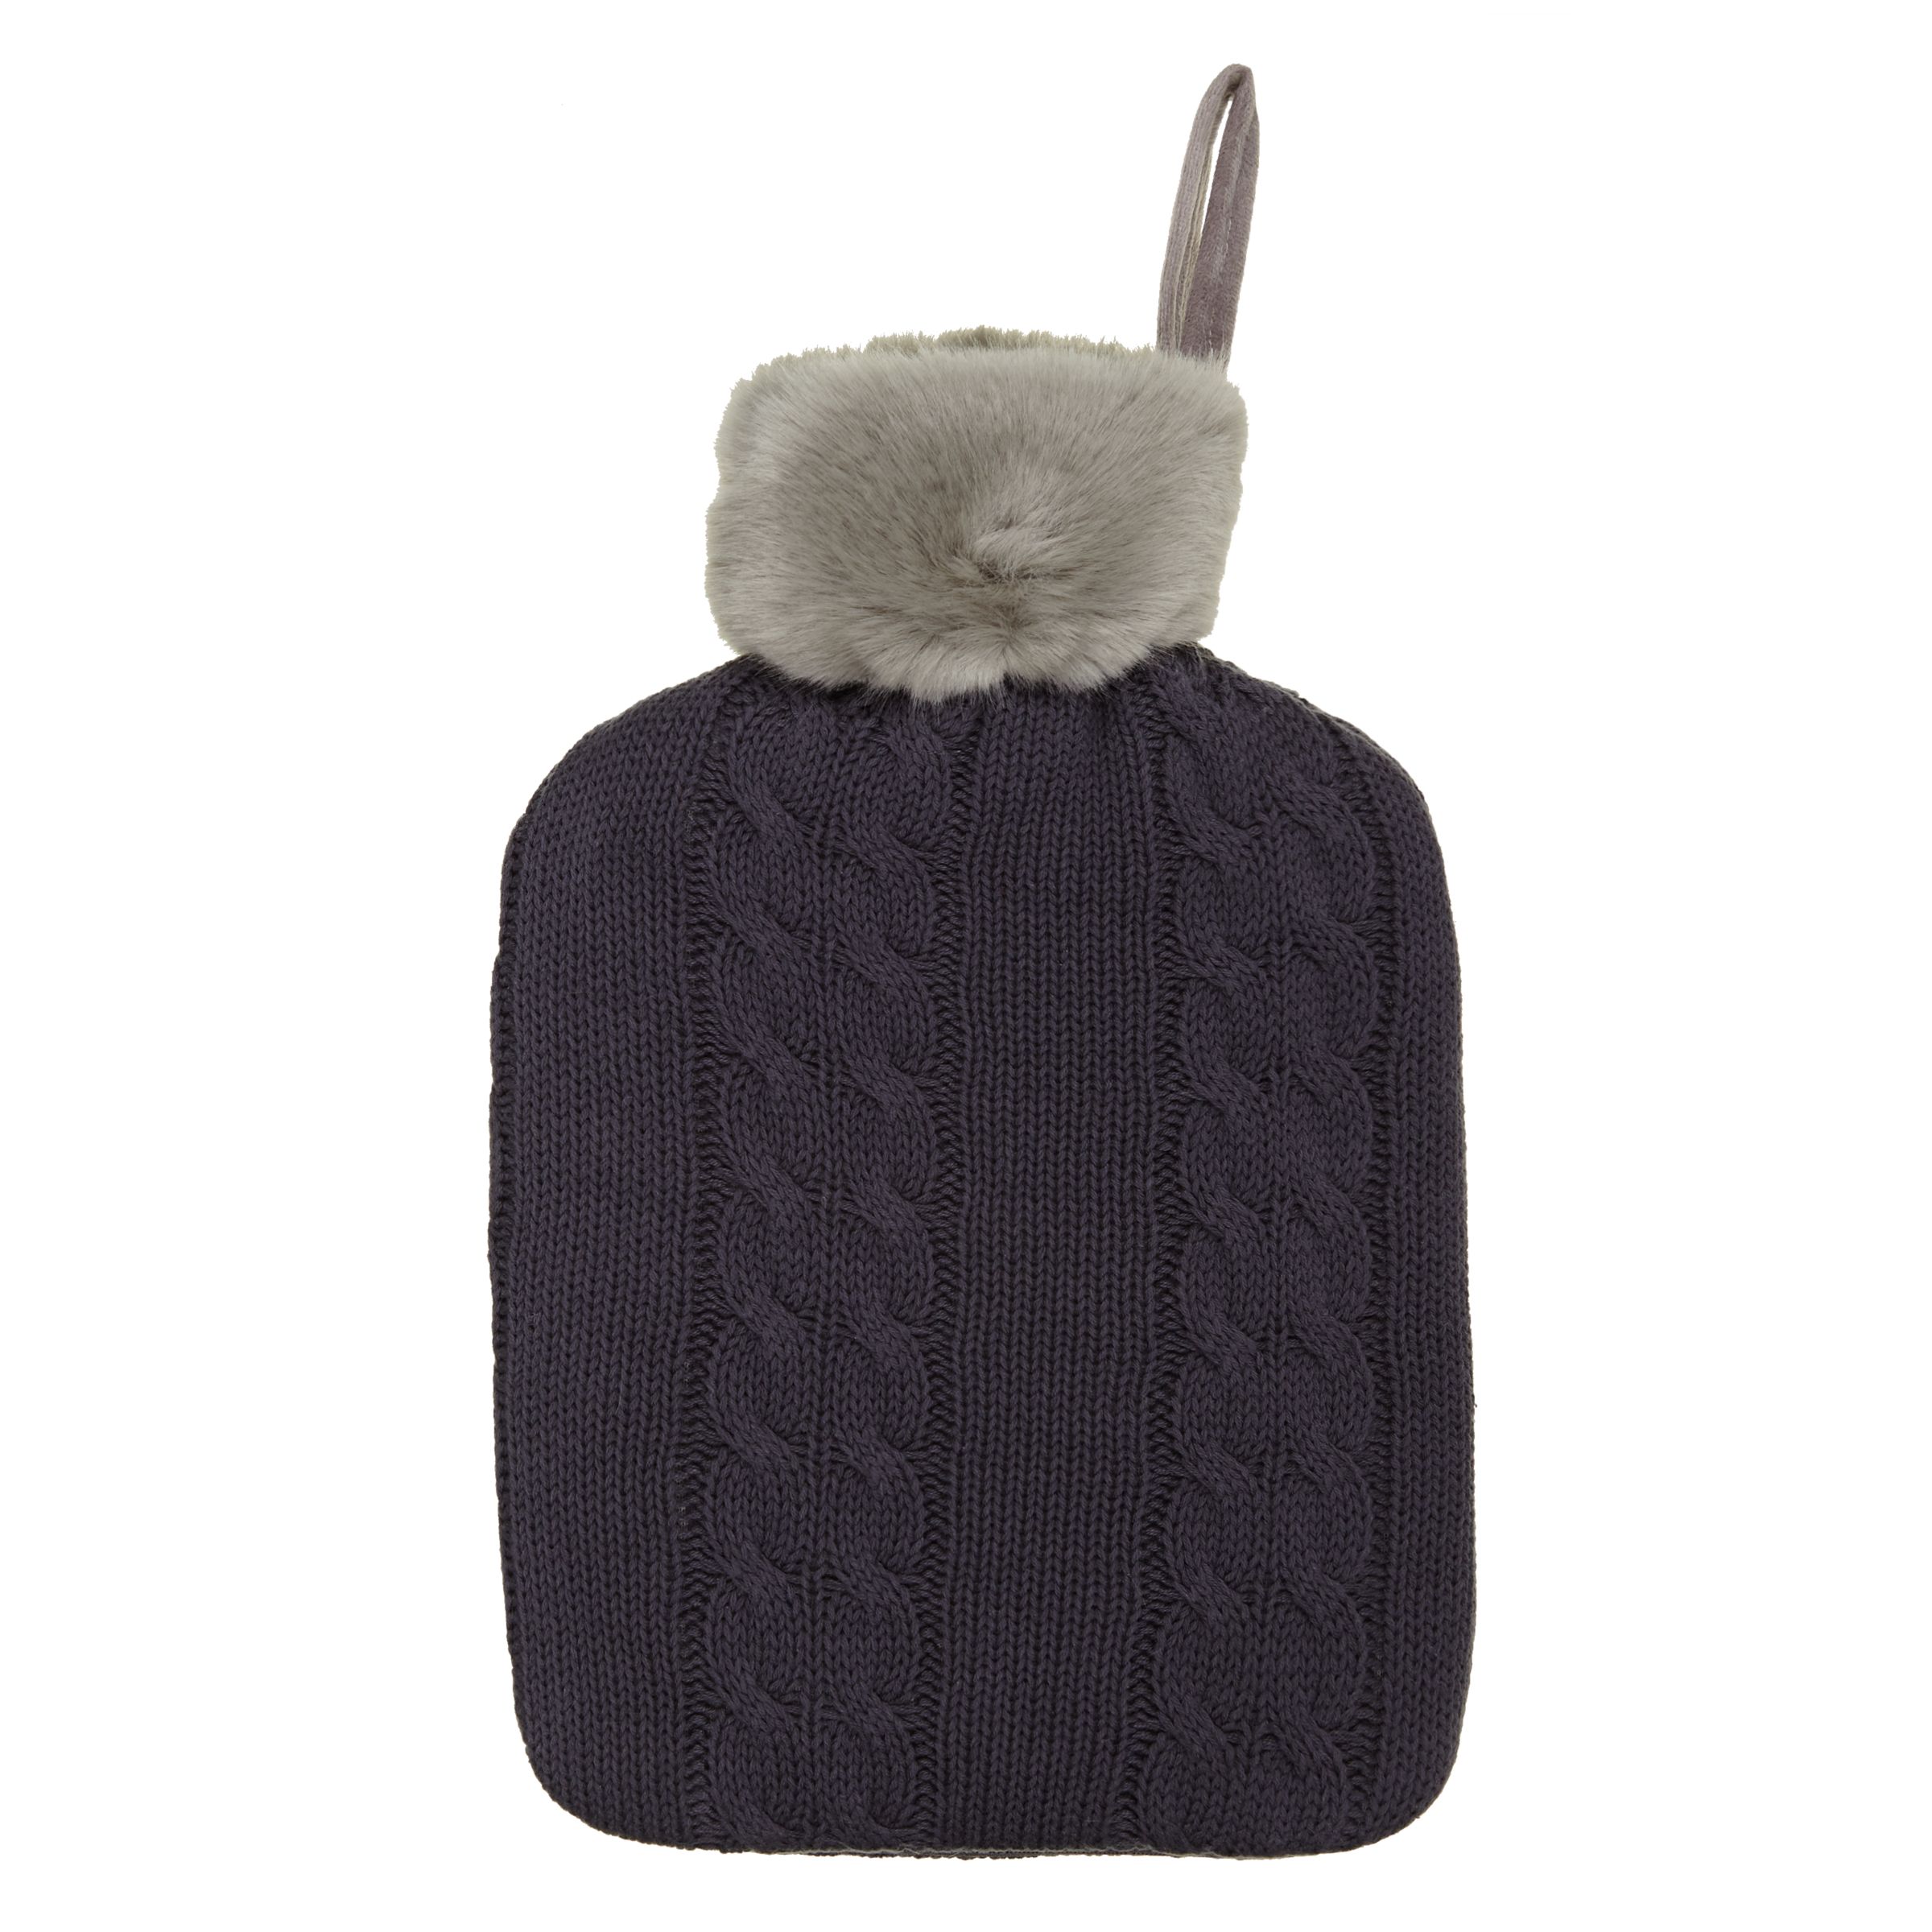 John Lewis & Partners Cable Knit & Faux Fur Hot Water Bottle and Cover